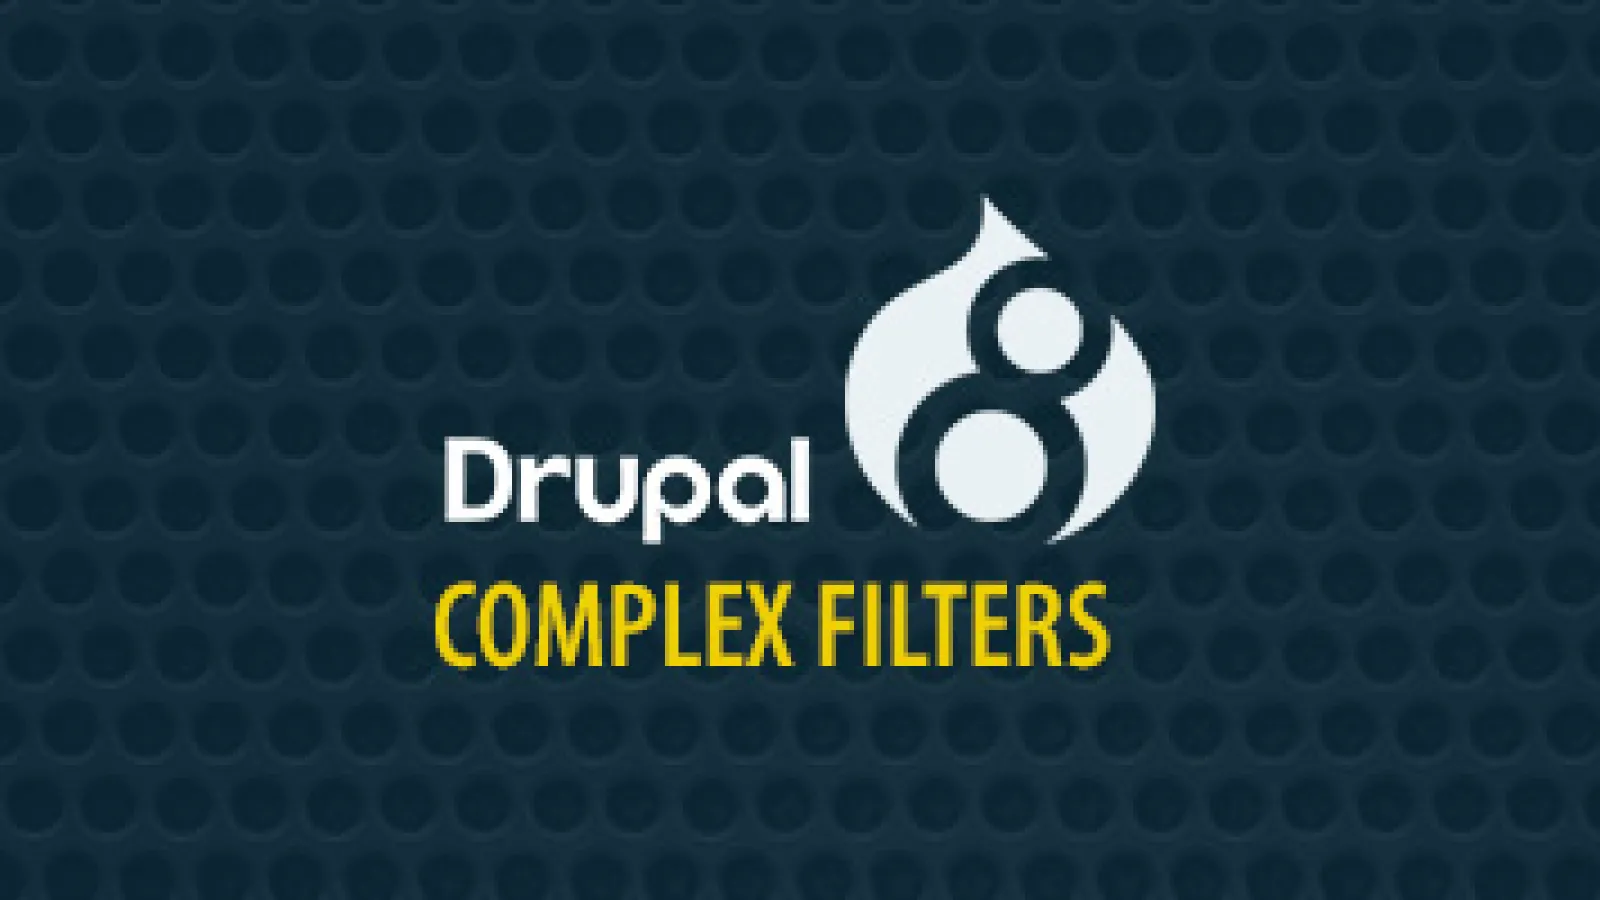 Views Contextual Filters to Display Content by passing Raw value from URL in Drupal 8